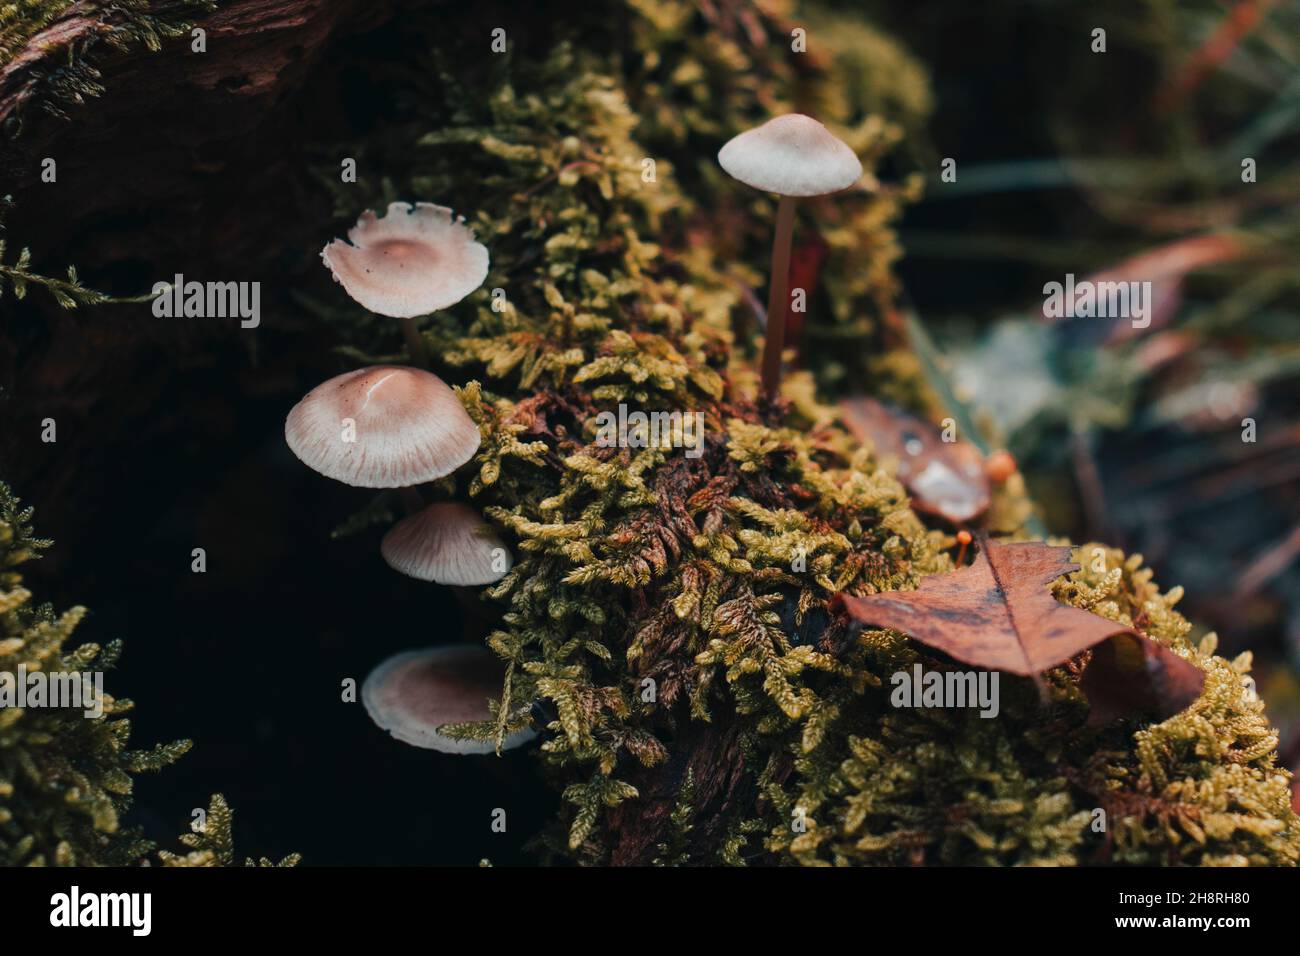 Top view of a group of unedible mushrooms. Copy space. Stock Photo